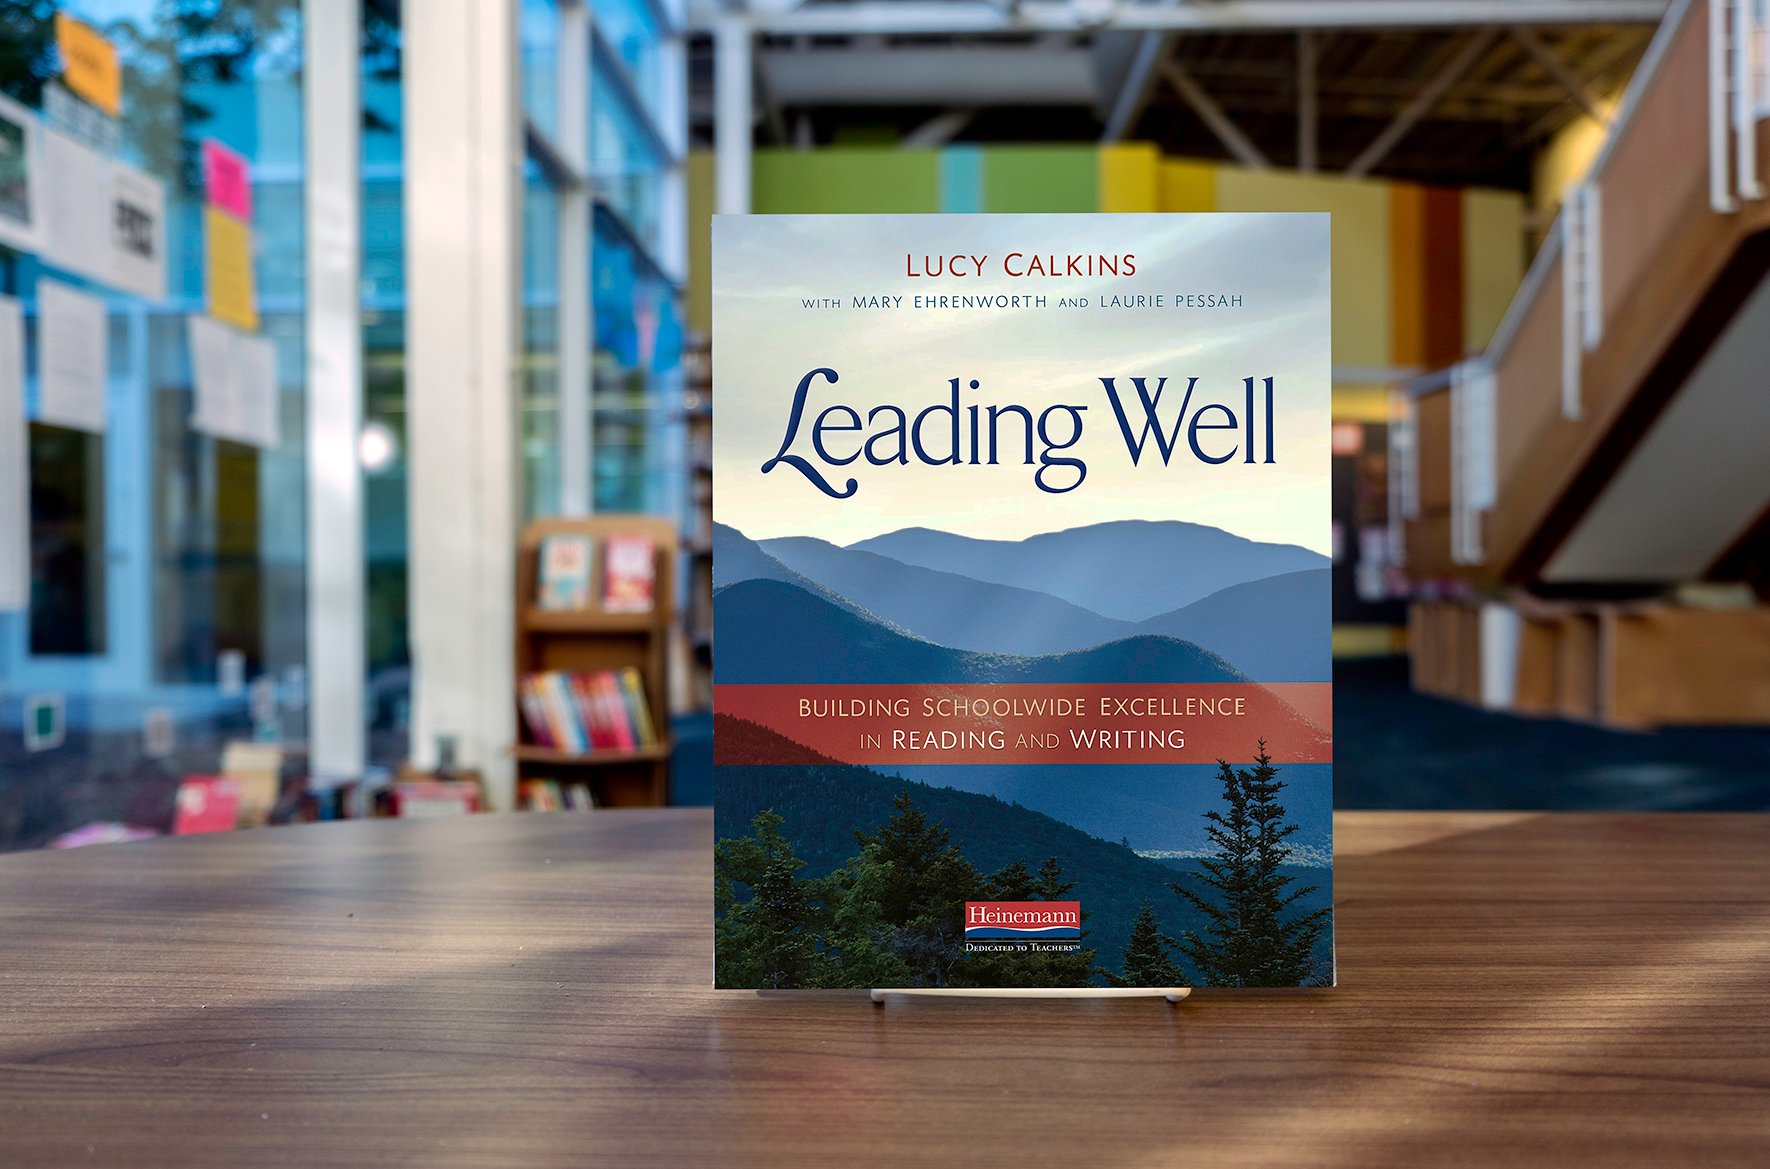 Leading-Well-book-in-the-wild_6684